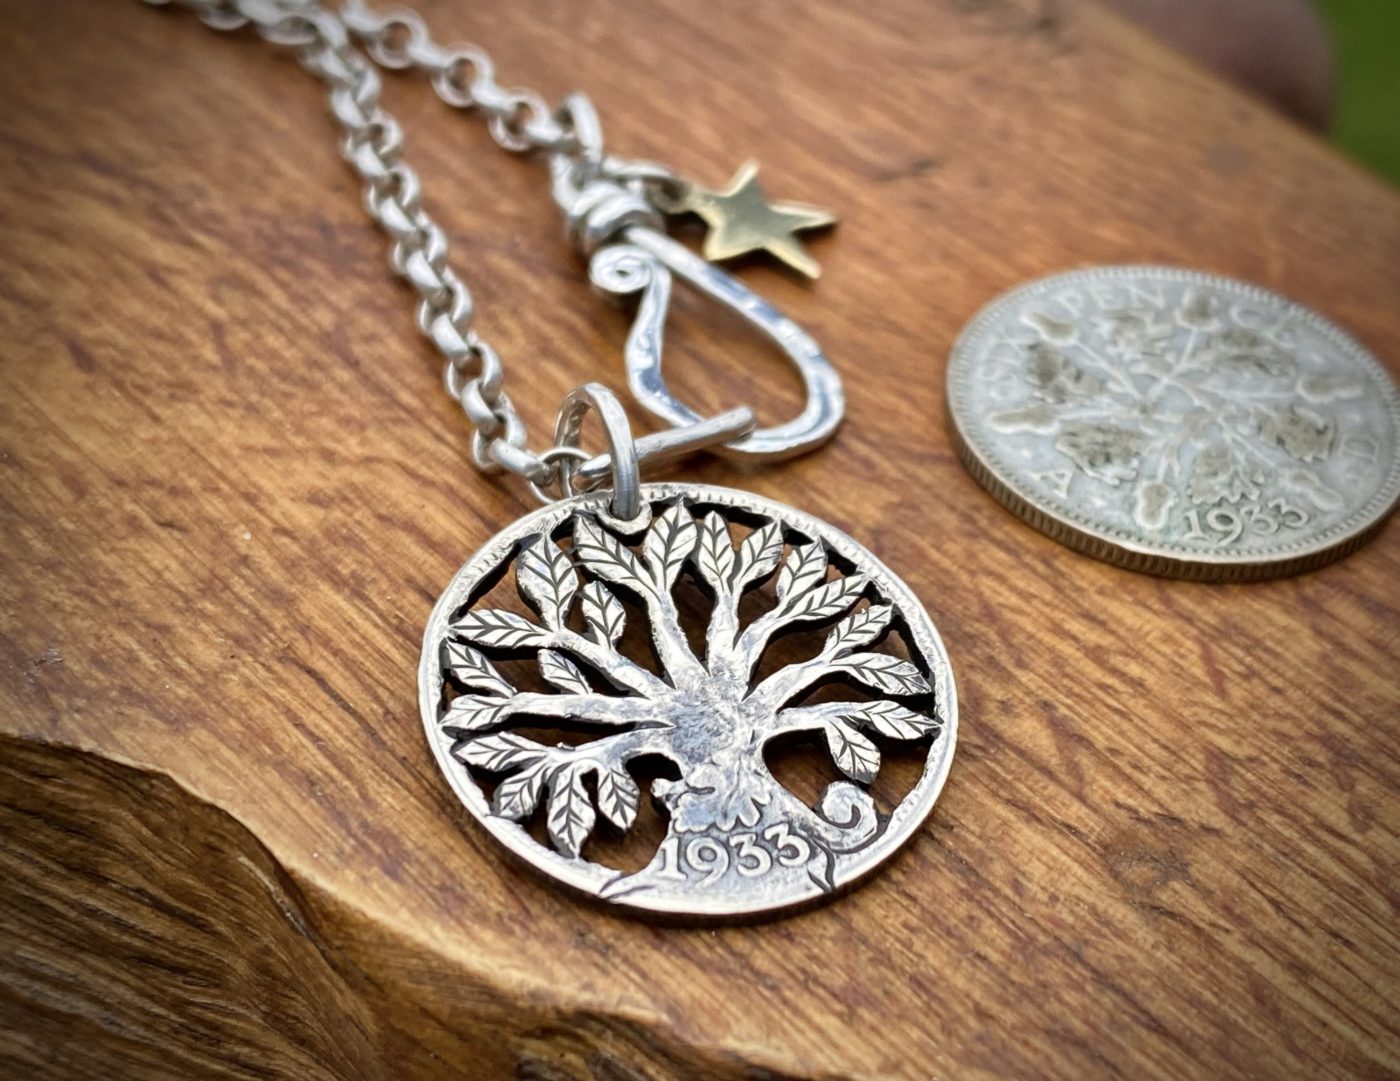 90th birthday sixpence coin tree of life birthday gift handmade and crafted by Hairy Growler in Cambridge. Unique and original special 90th birthday present